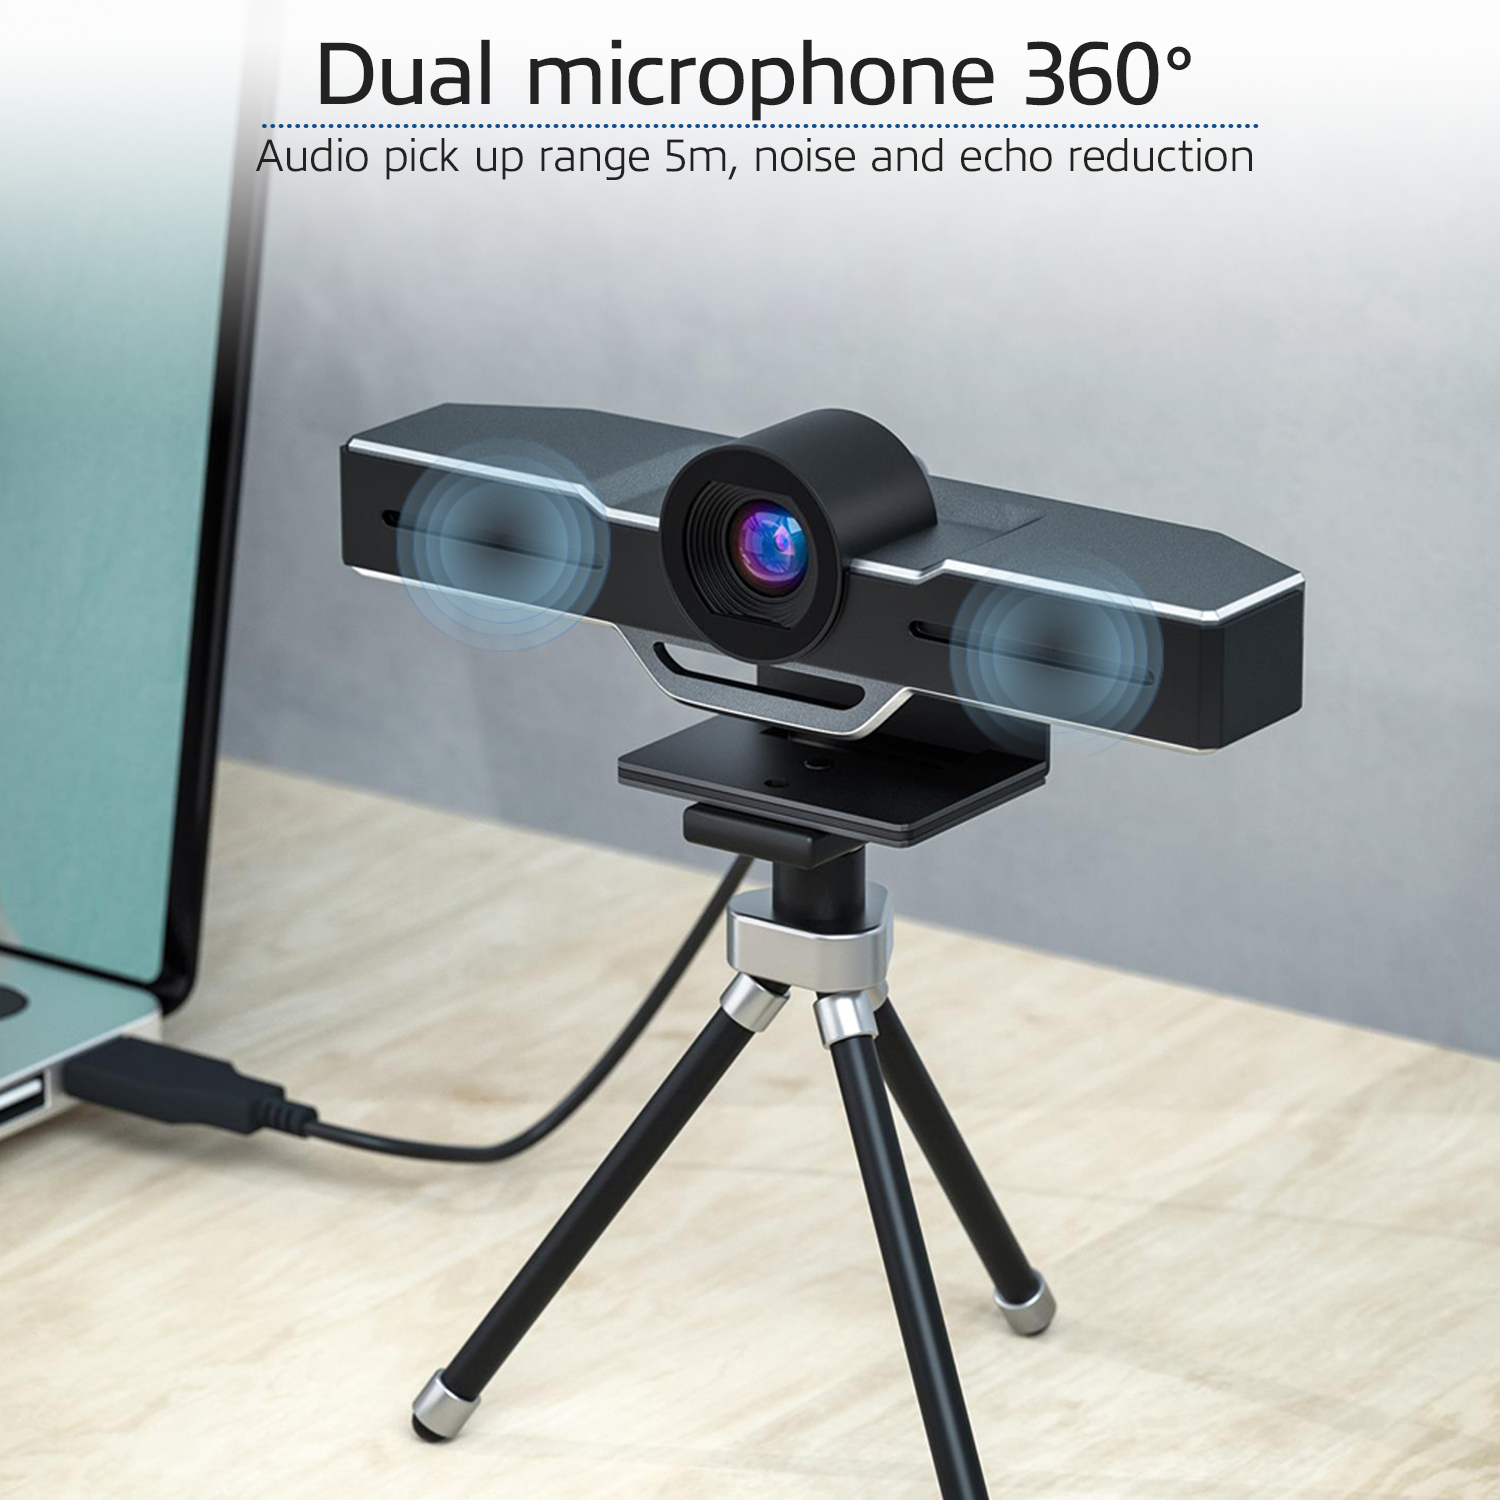 Full HD Professional Conference Camera with microphone zoom remote control